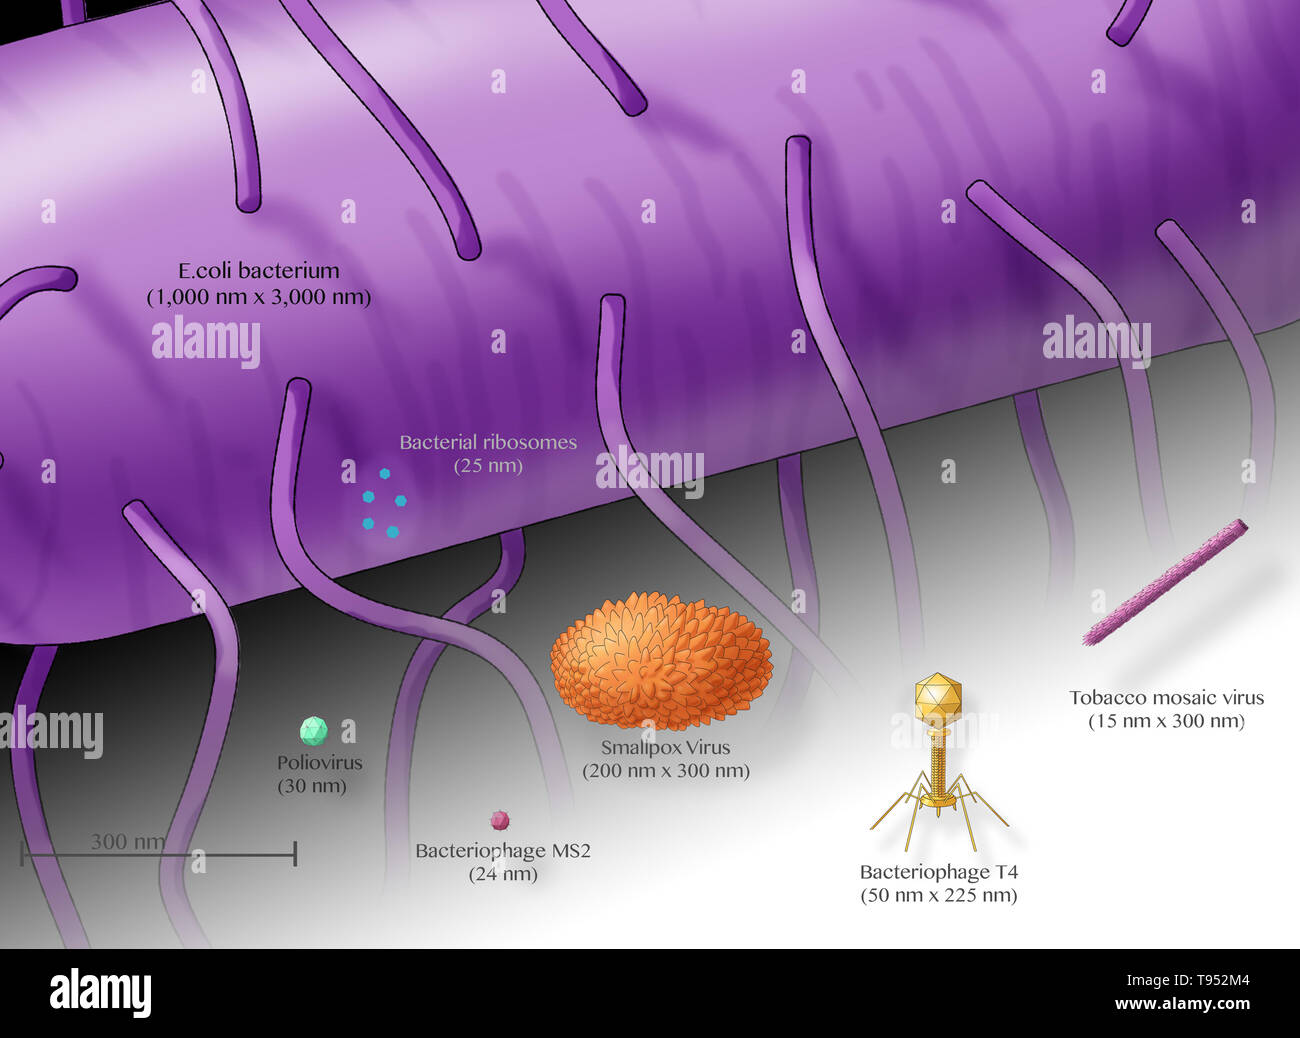 Illustration showing the relative sizes of an E. coli bacterium (top, purple) and several different viruses. Stock Photo